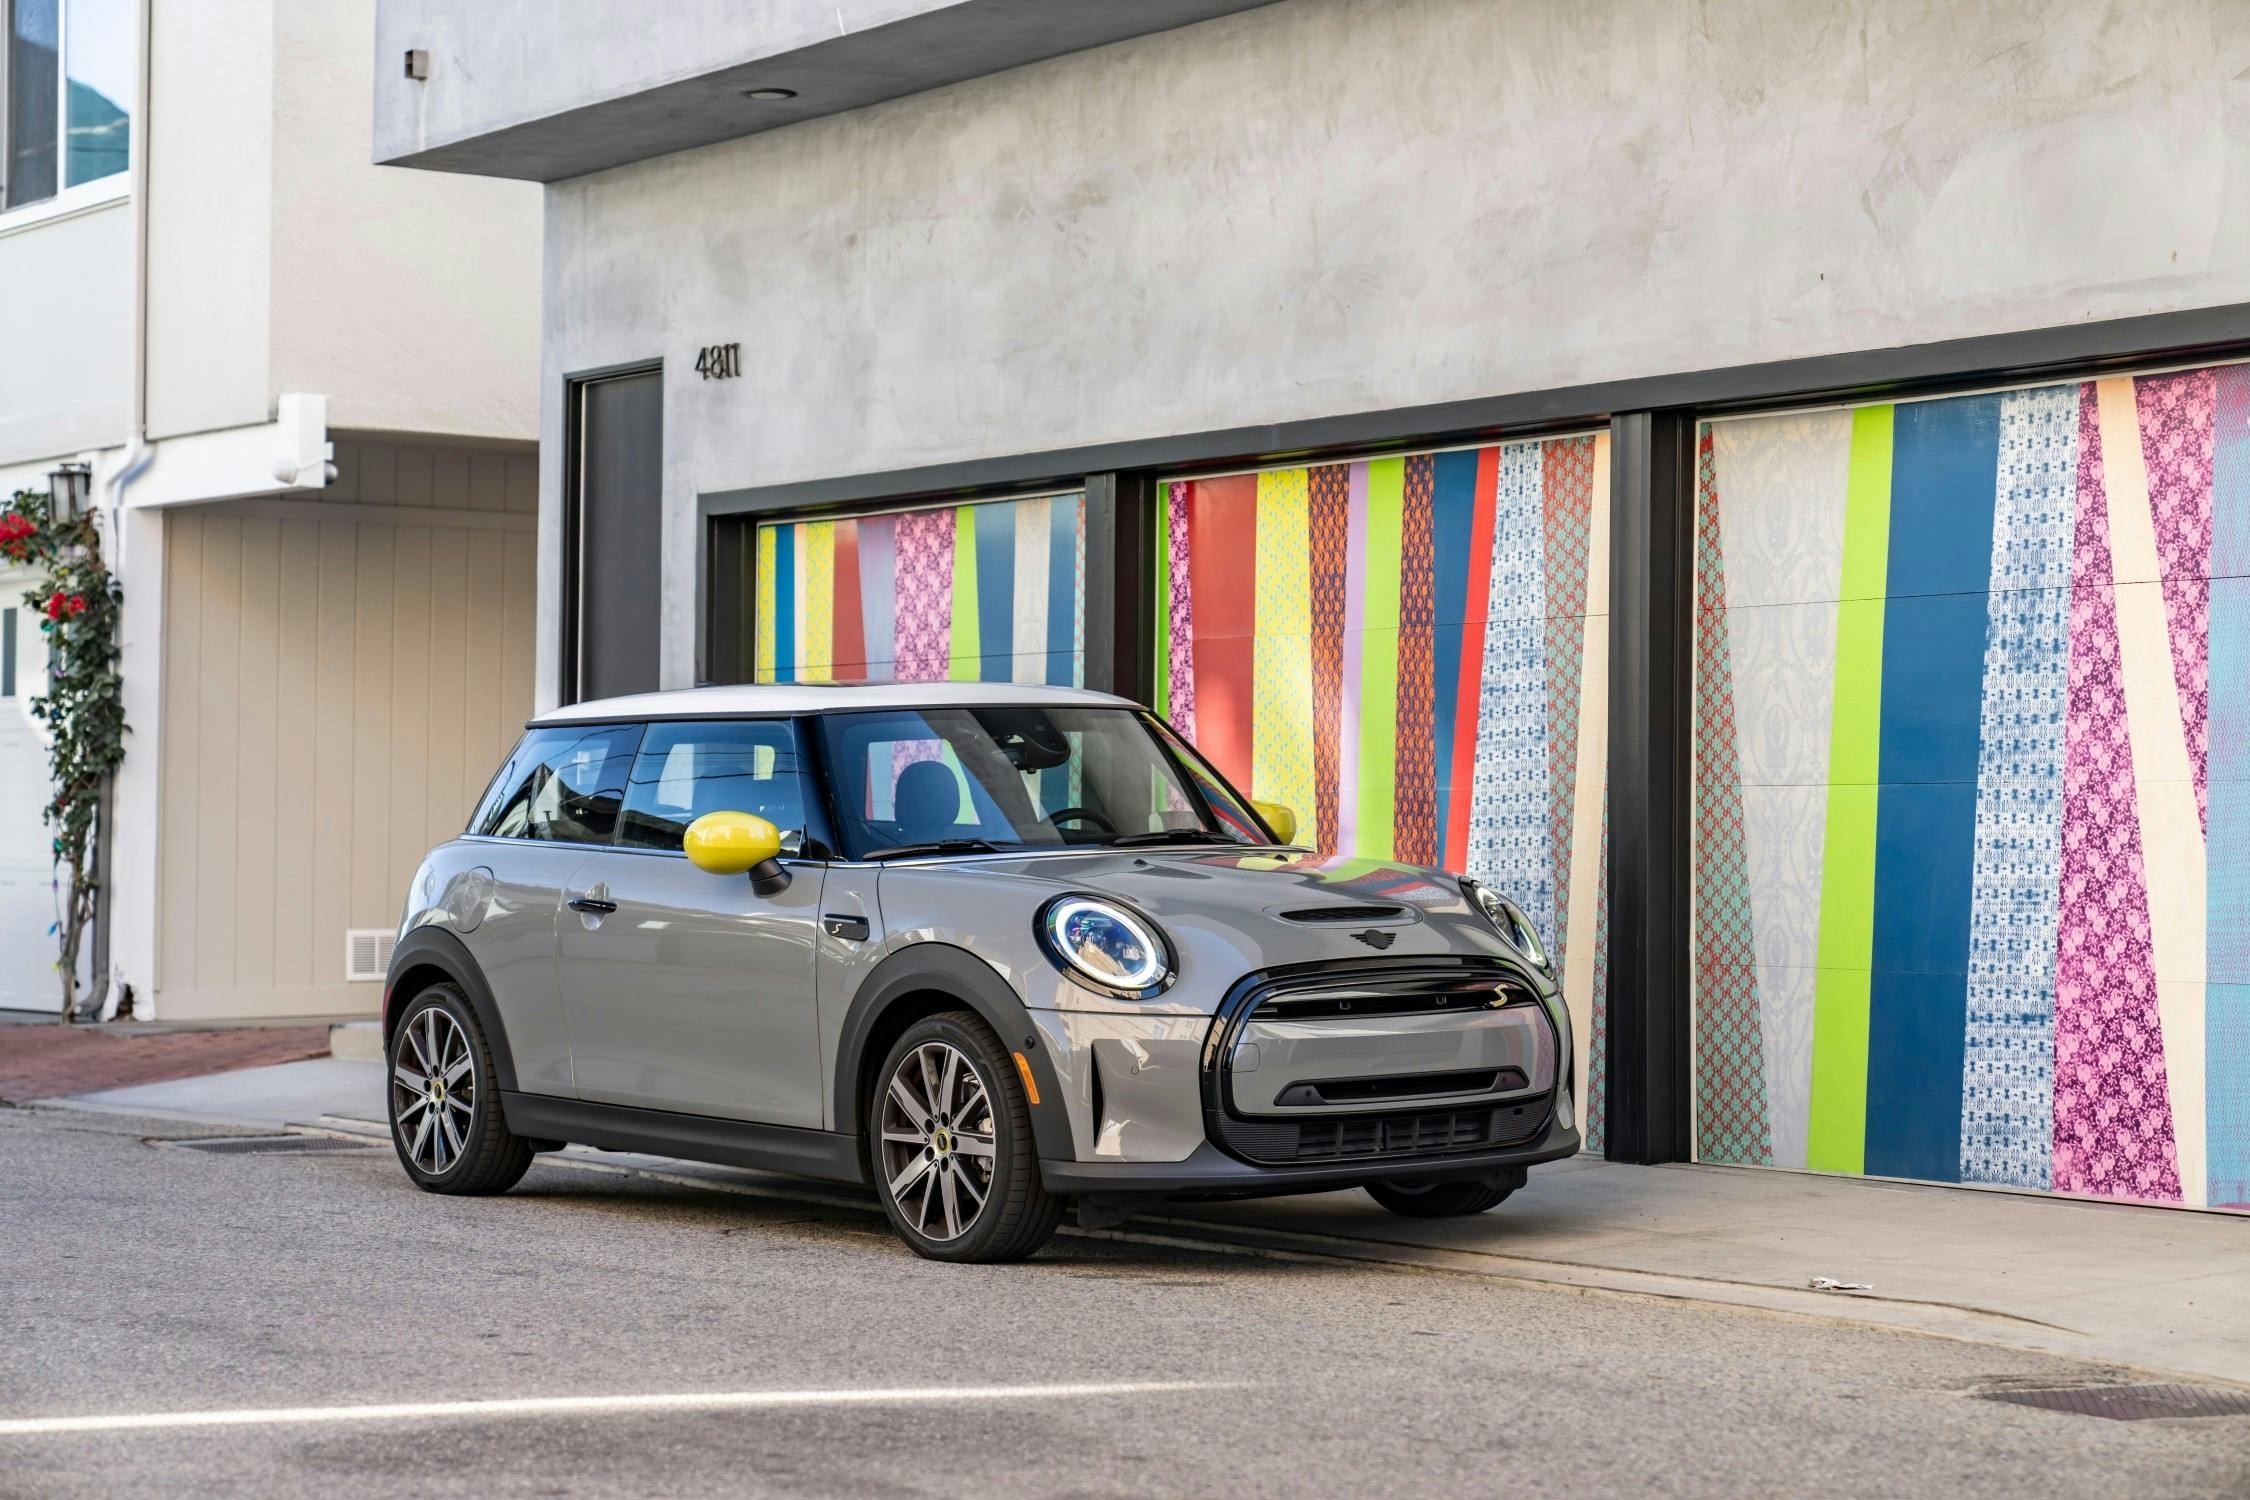 Review: The 2022 MINI Cooper S is more of a high-performance hatchback